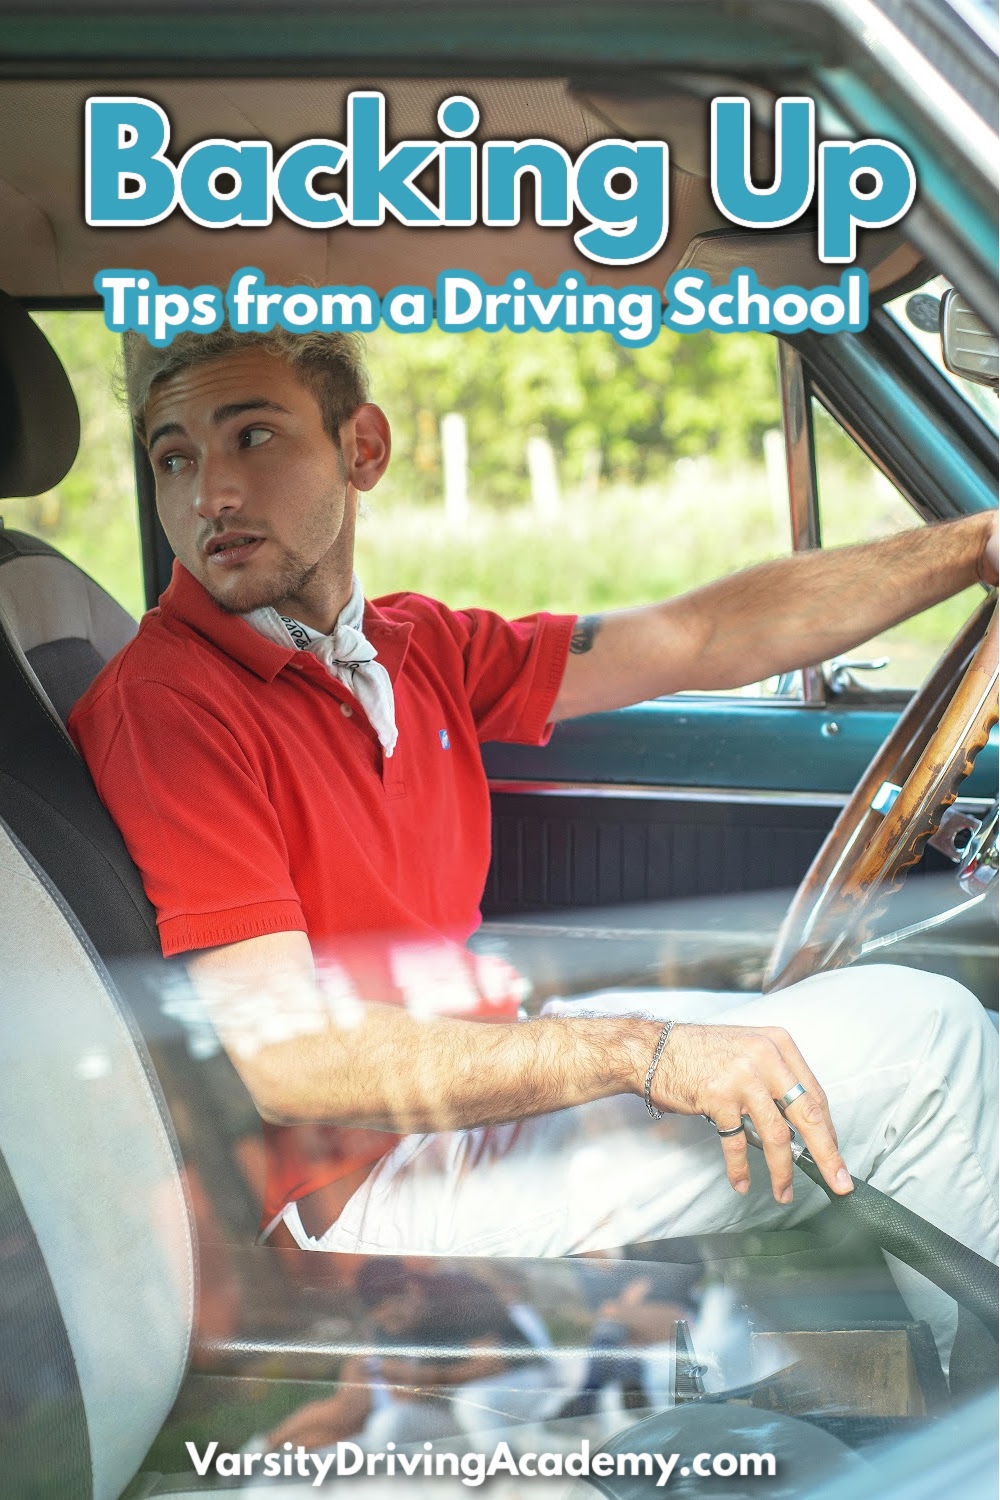 Getting tips on backing up a vehicle and putting them to use is the best way to be prepared.